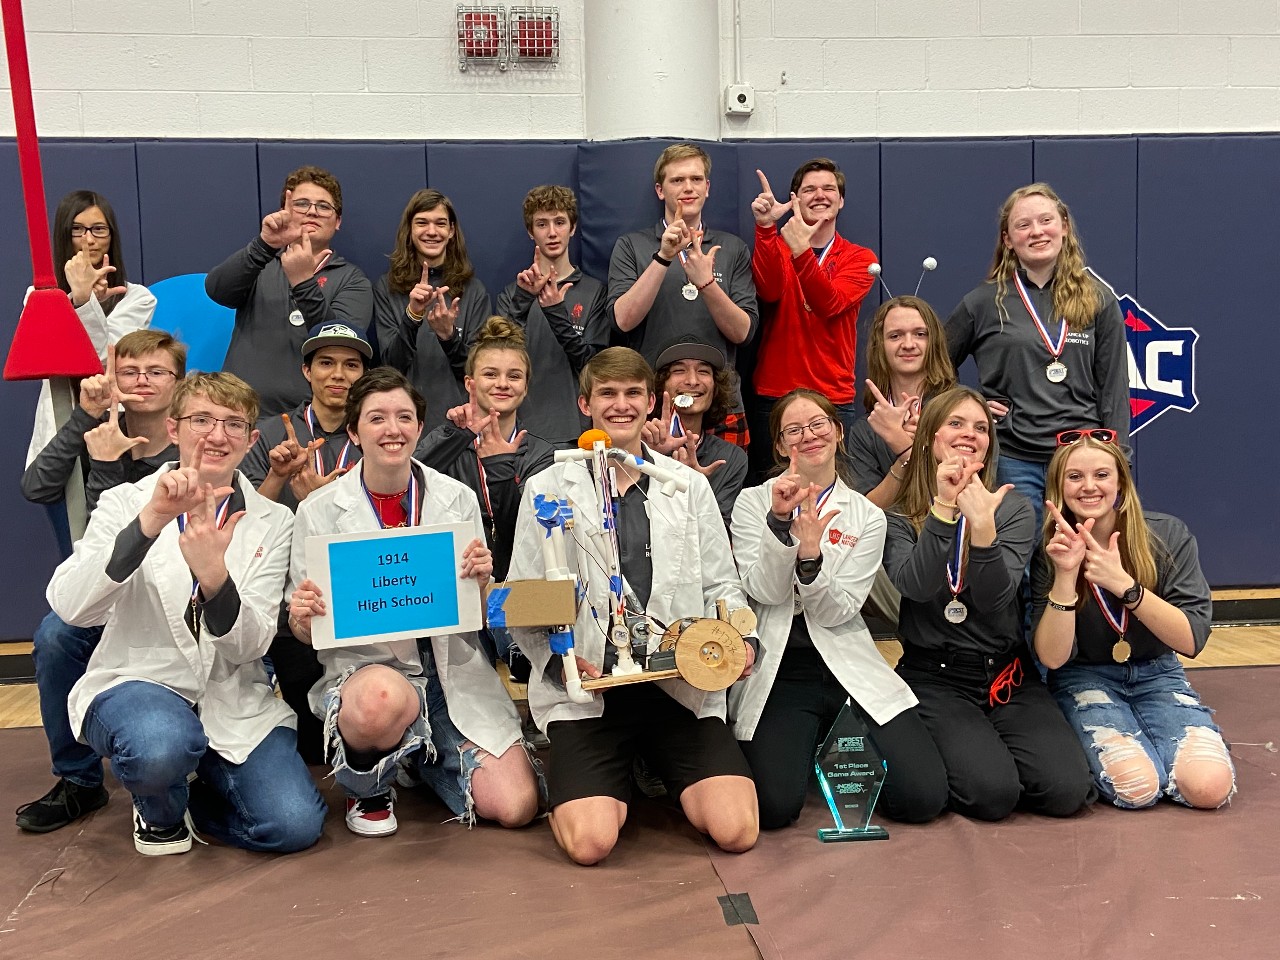 Liberty's Robotics teams poses for a picture with the double L hand gesture at their robotic competition on November 5th.